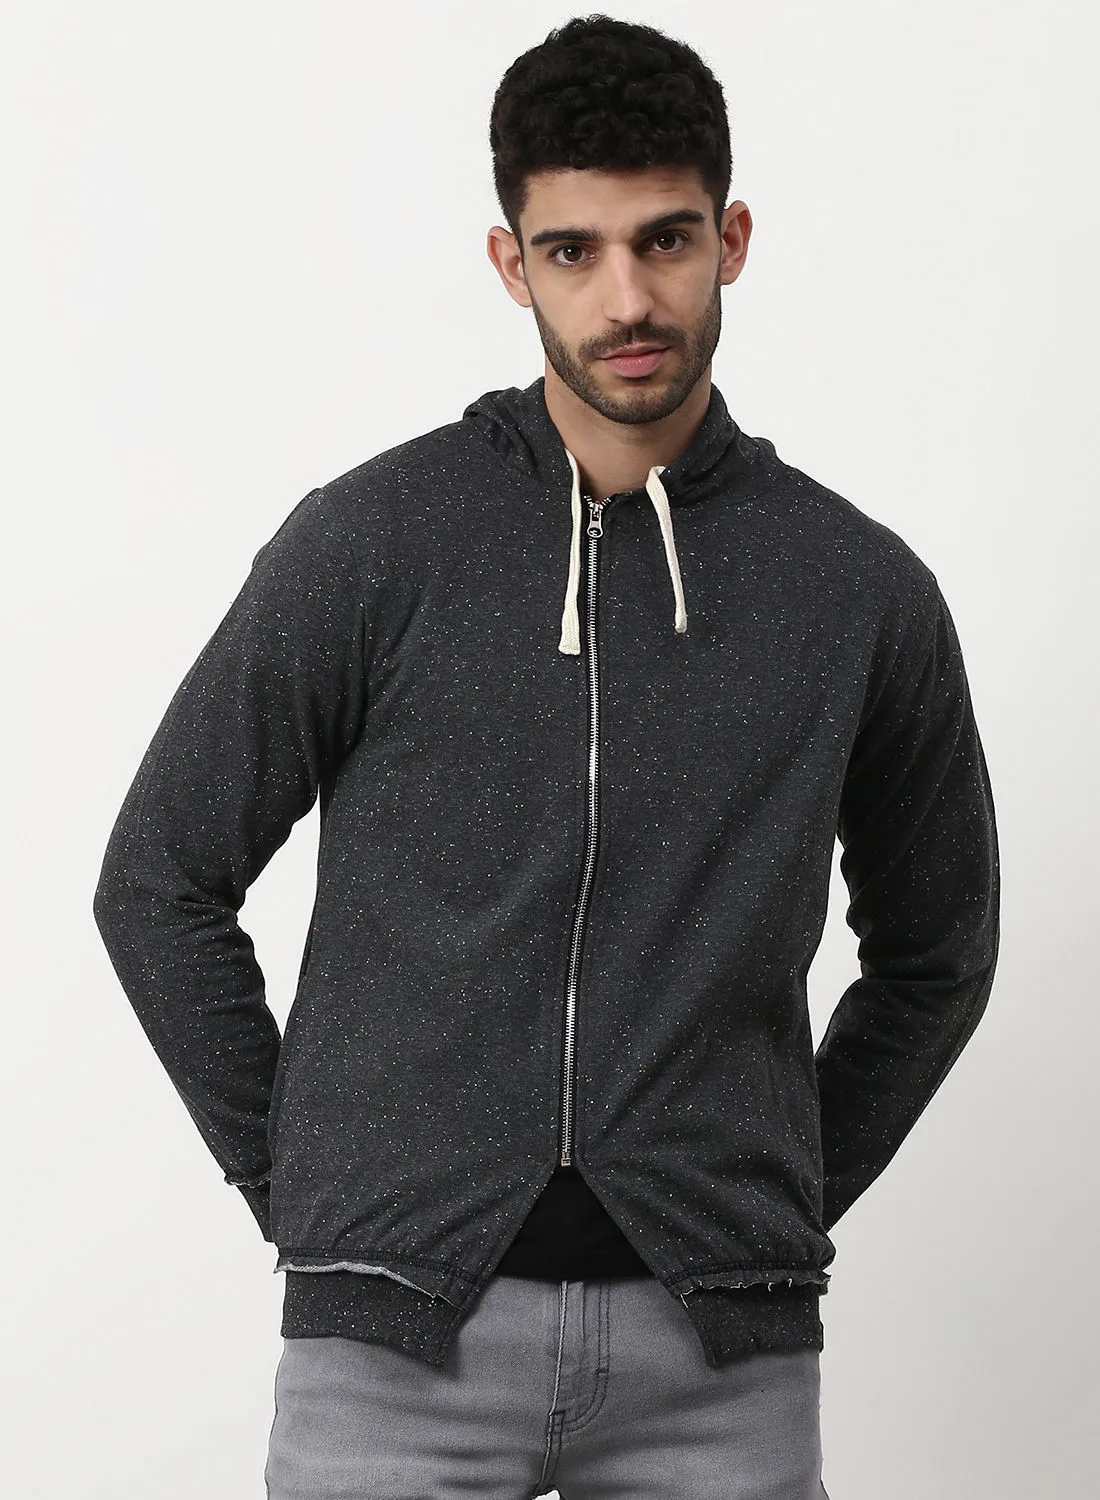 Campus Sutra Outerwear Comfortable Jacket Grey